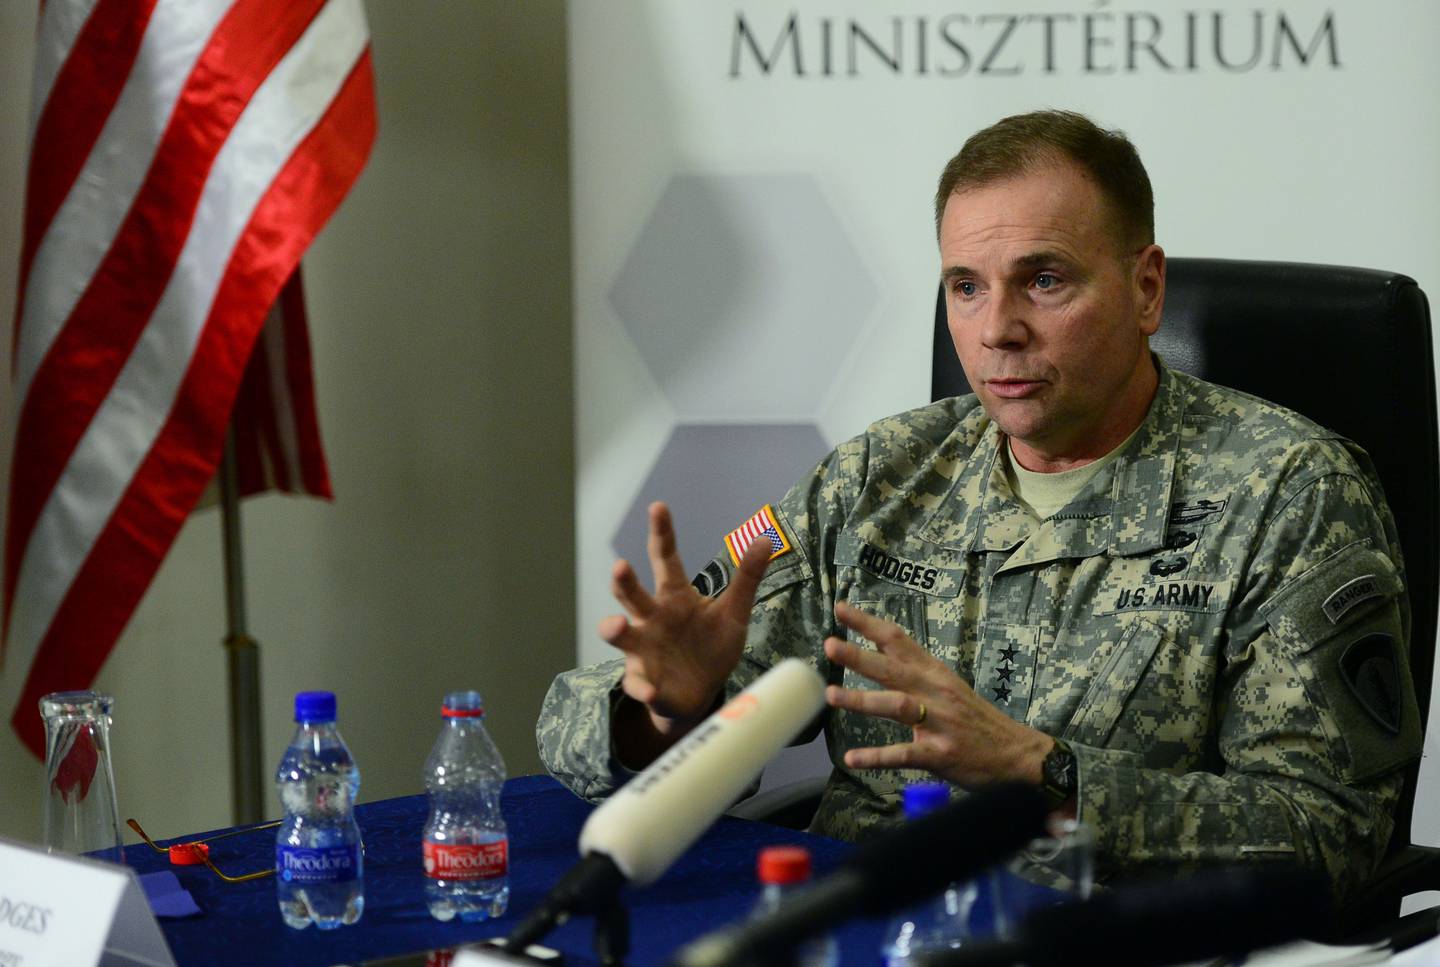 Commanding General Ben Hodges, United States Army Europe (USAREUR) attends a press conference at the headquarter of the military air base in Papa, Hungary on February 26, 2015. Between 22 February and 3 March, more than 750 Hungarian and American troops are participating in a joint tactical-level exercise, which is combined with airdrop operations and live firing.  AFP PHOTO / ATTILA KISBENEDEK